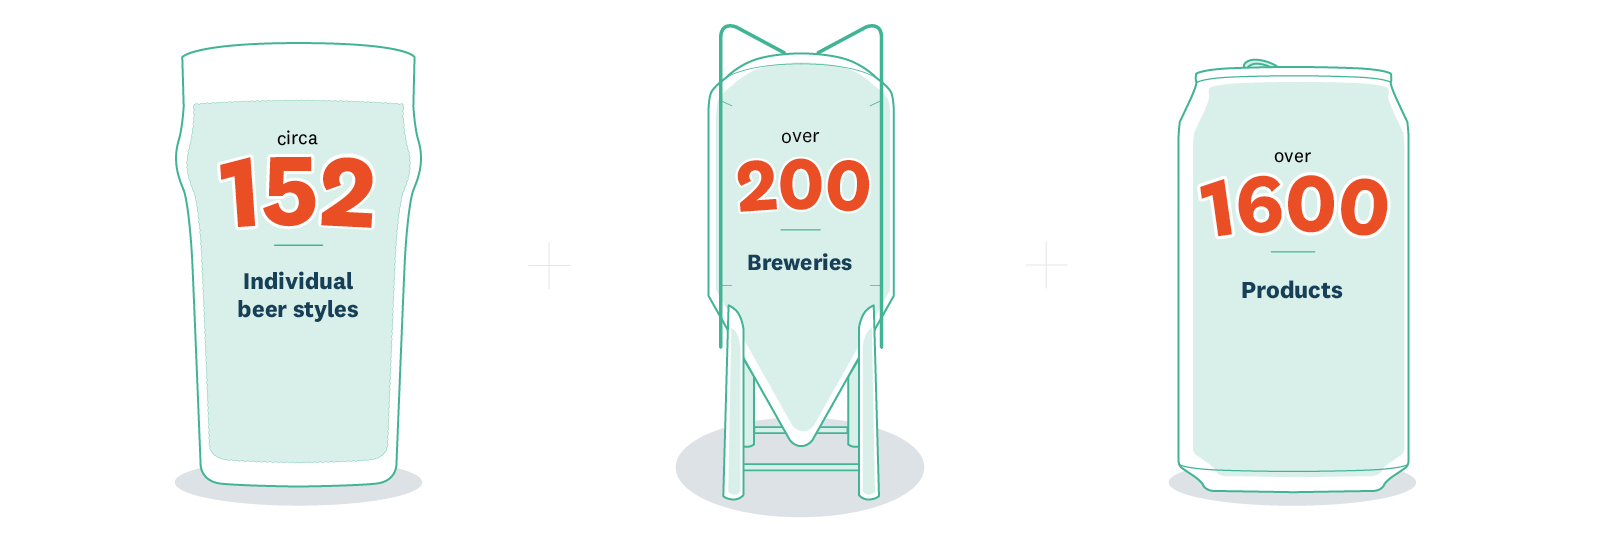 There are circa 152 individual beer styles, over 200 breweries and over 1600 products in the NZ brewing industry.. 